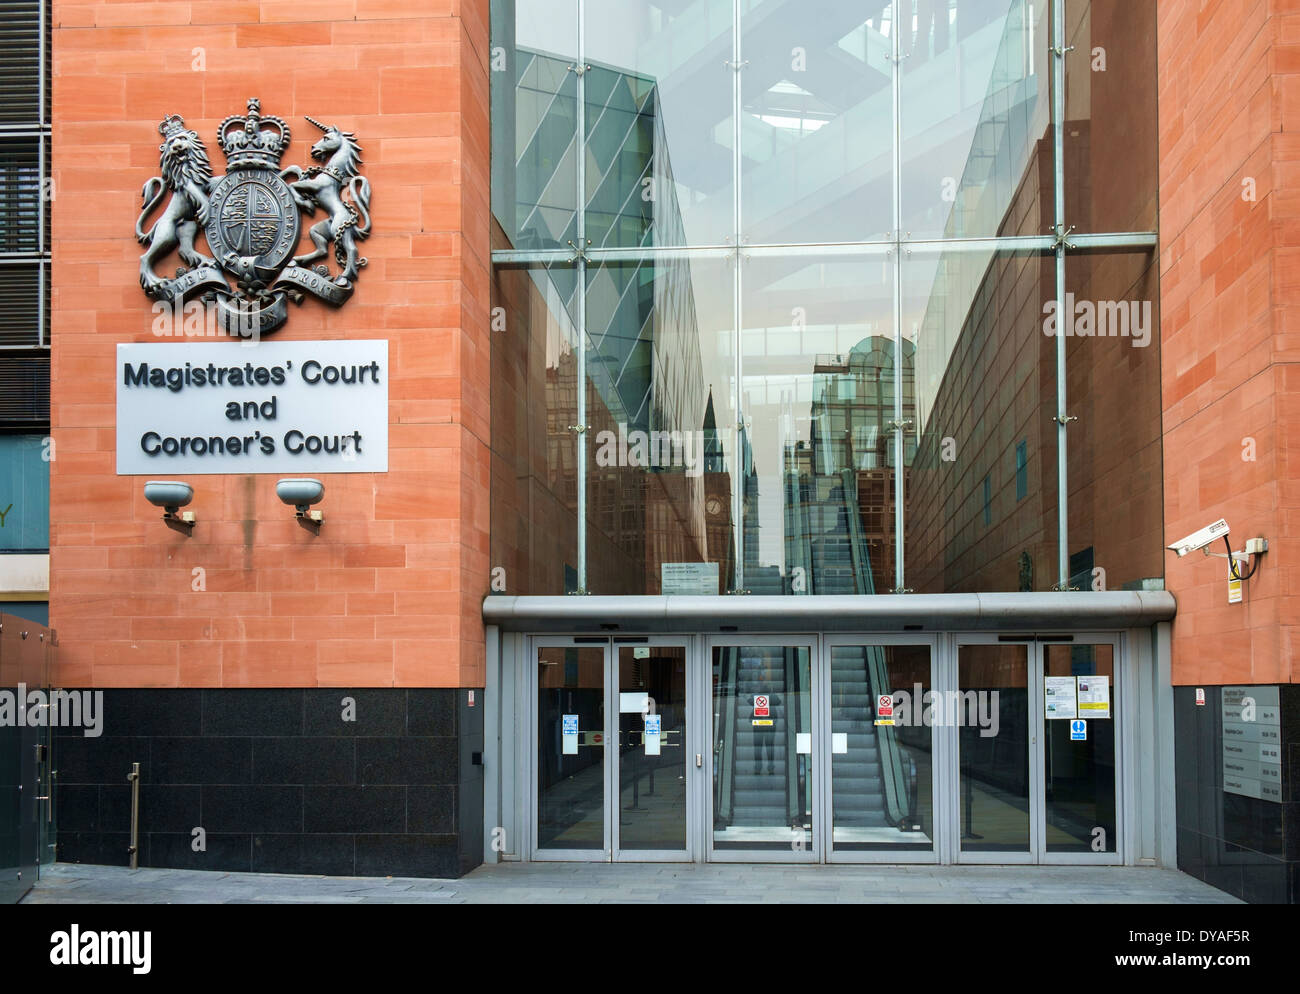 Magistrates' Court and Coroner's Court, Crown Square, Manchester, England, UK Stock Photo